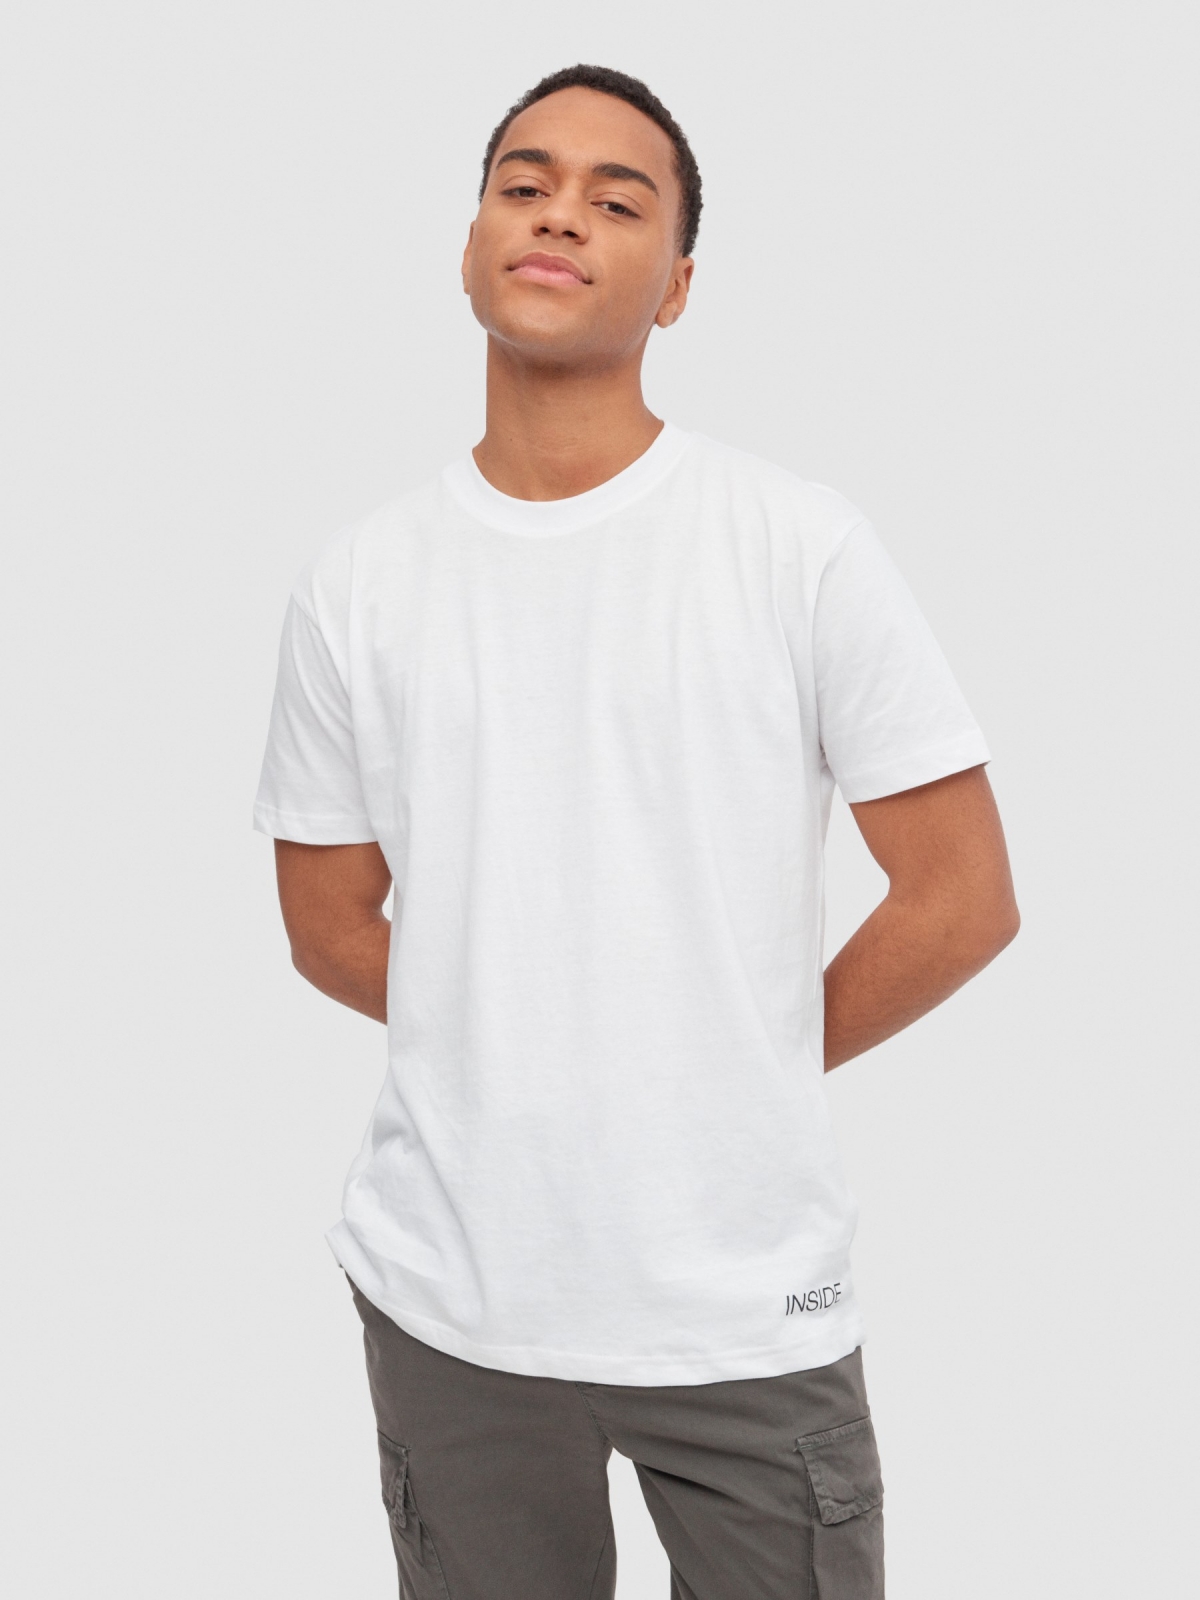 Basic T-shirt white middle front view